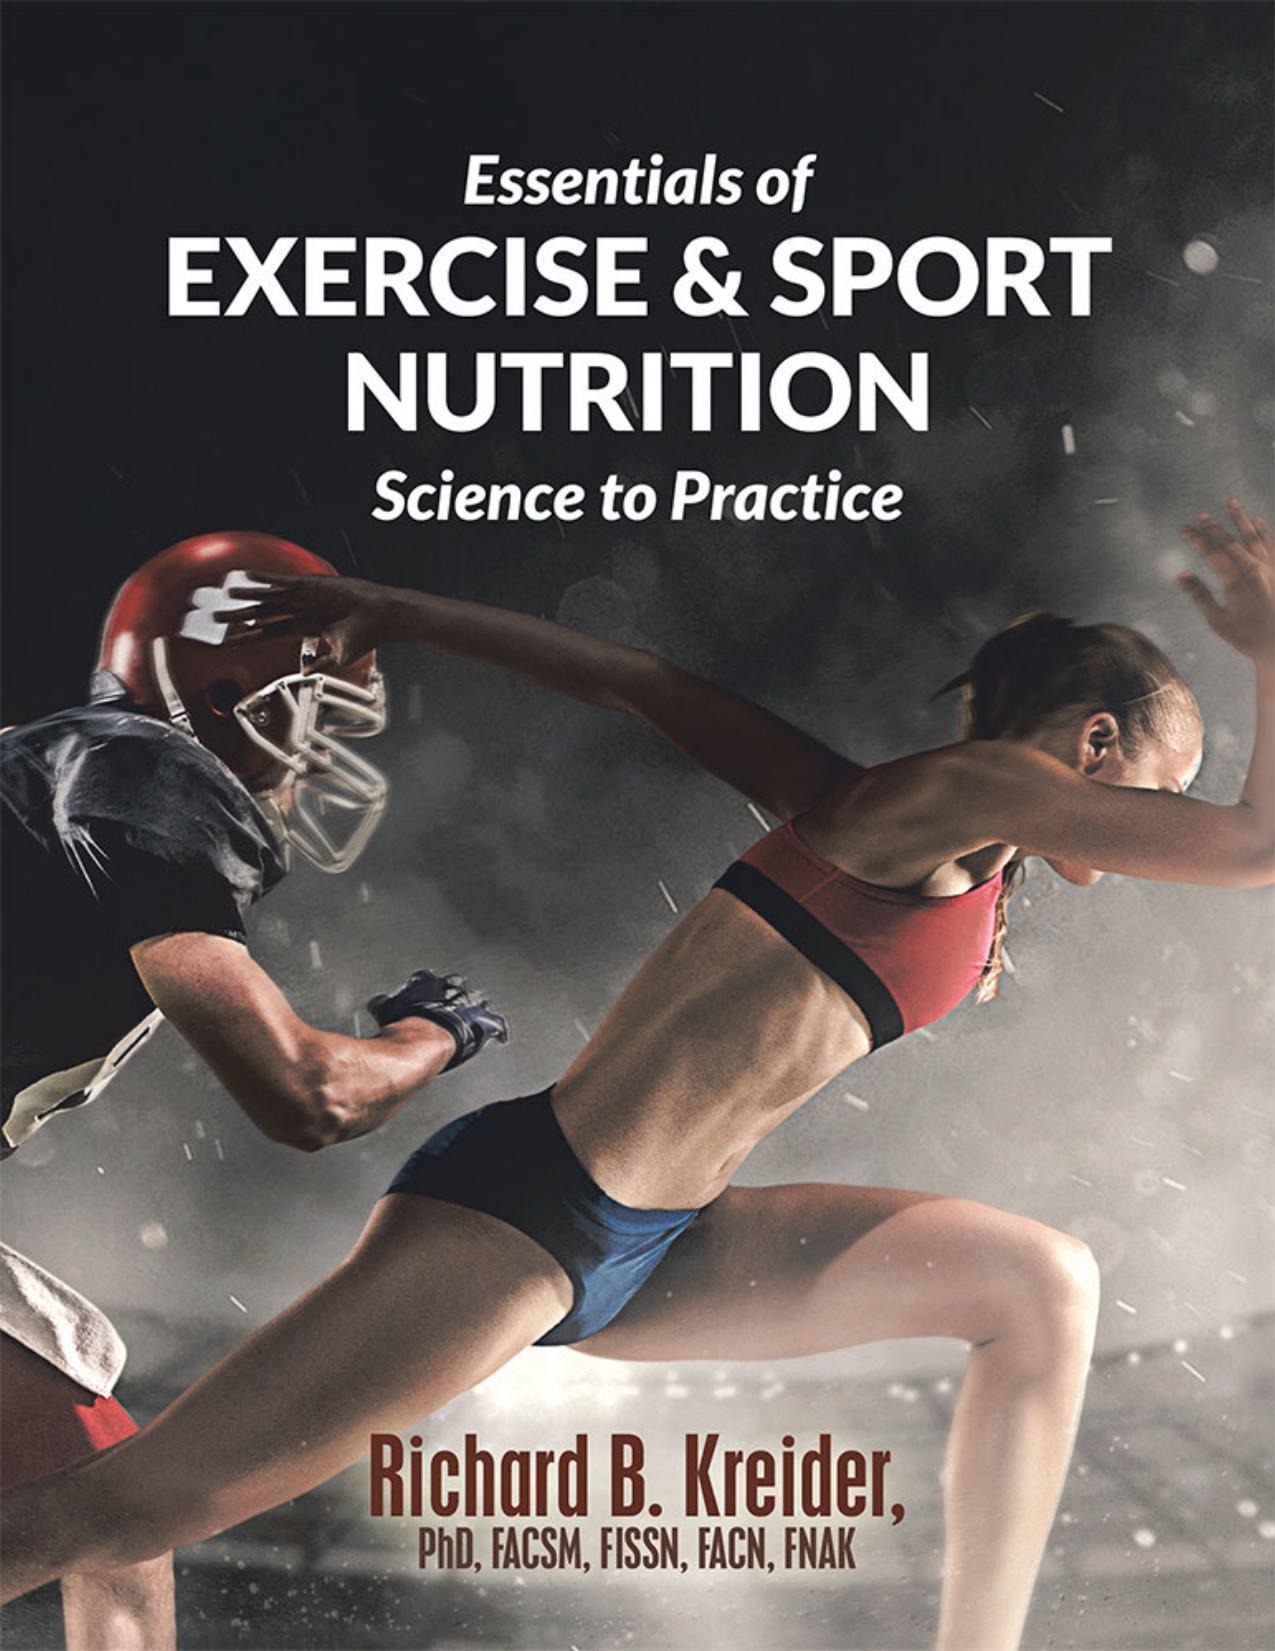 (eBook PDF)Essentials of Exercise & Sport Nutrition: Science to Practice by Richard B. Kreider